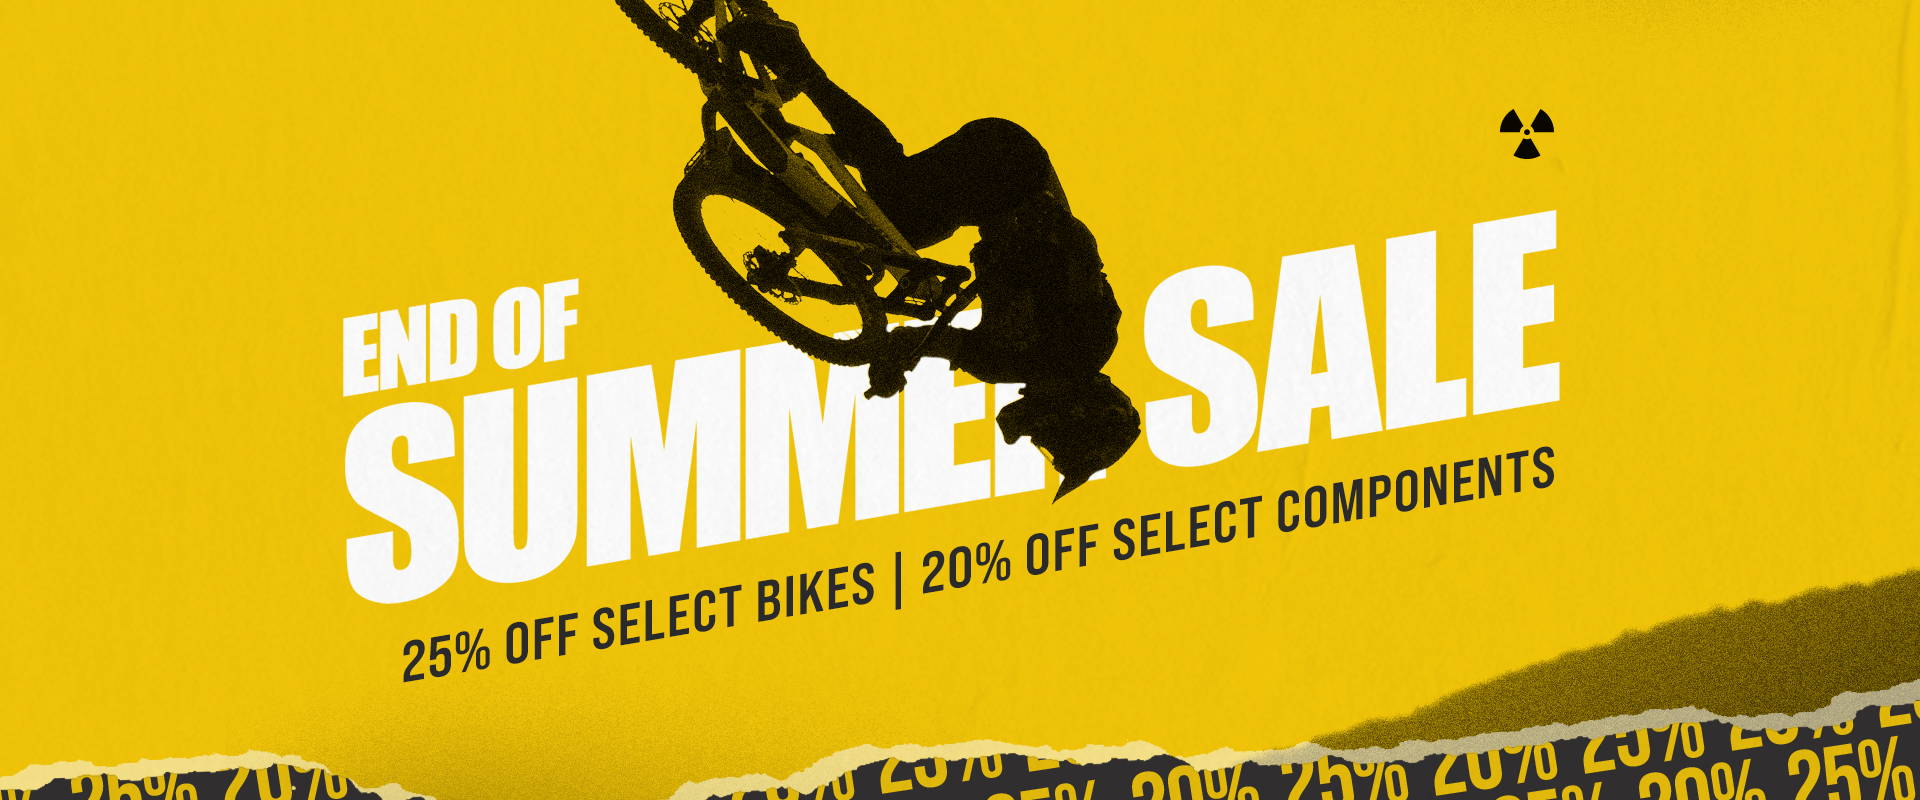 For a limited time get up to 25 % off Nukeproof bikes, parts, and accessories